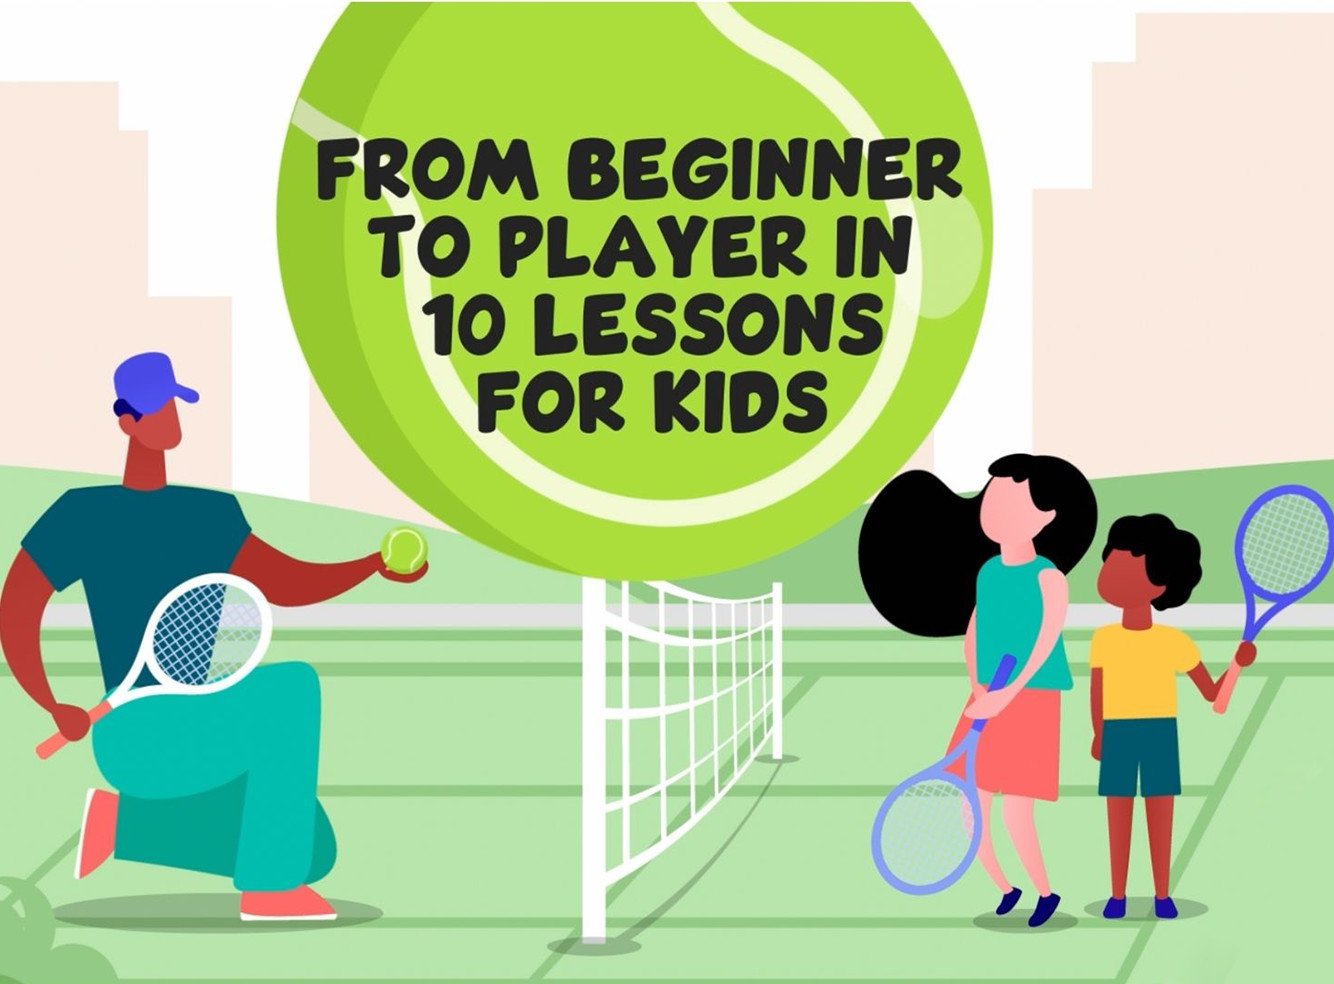  From Beginner to Player in 10 Lessons for Kids